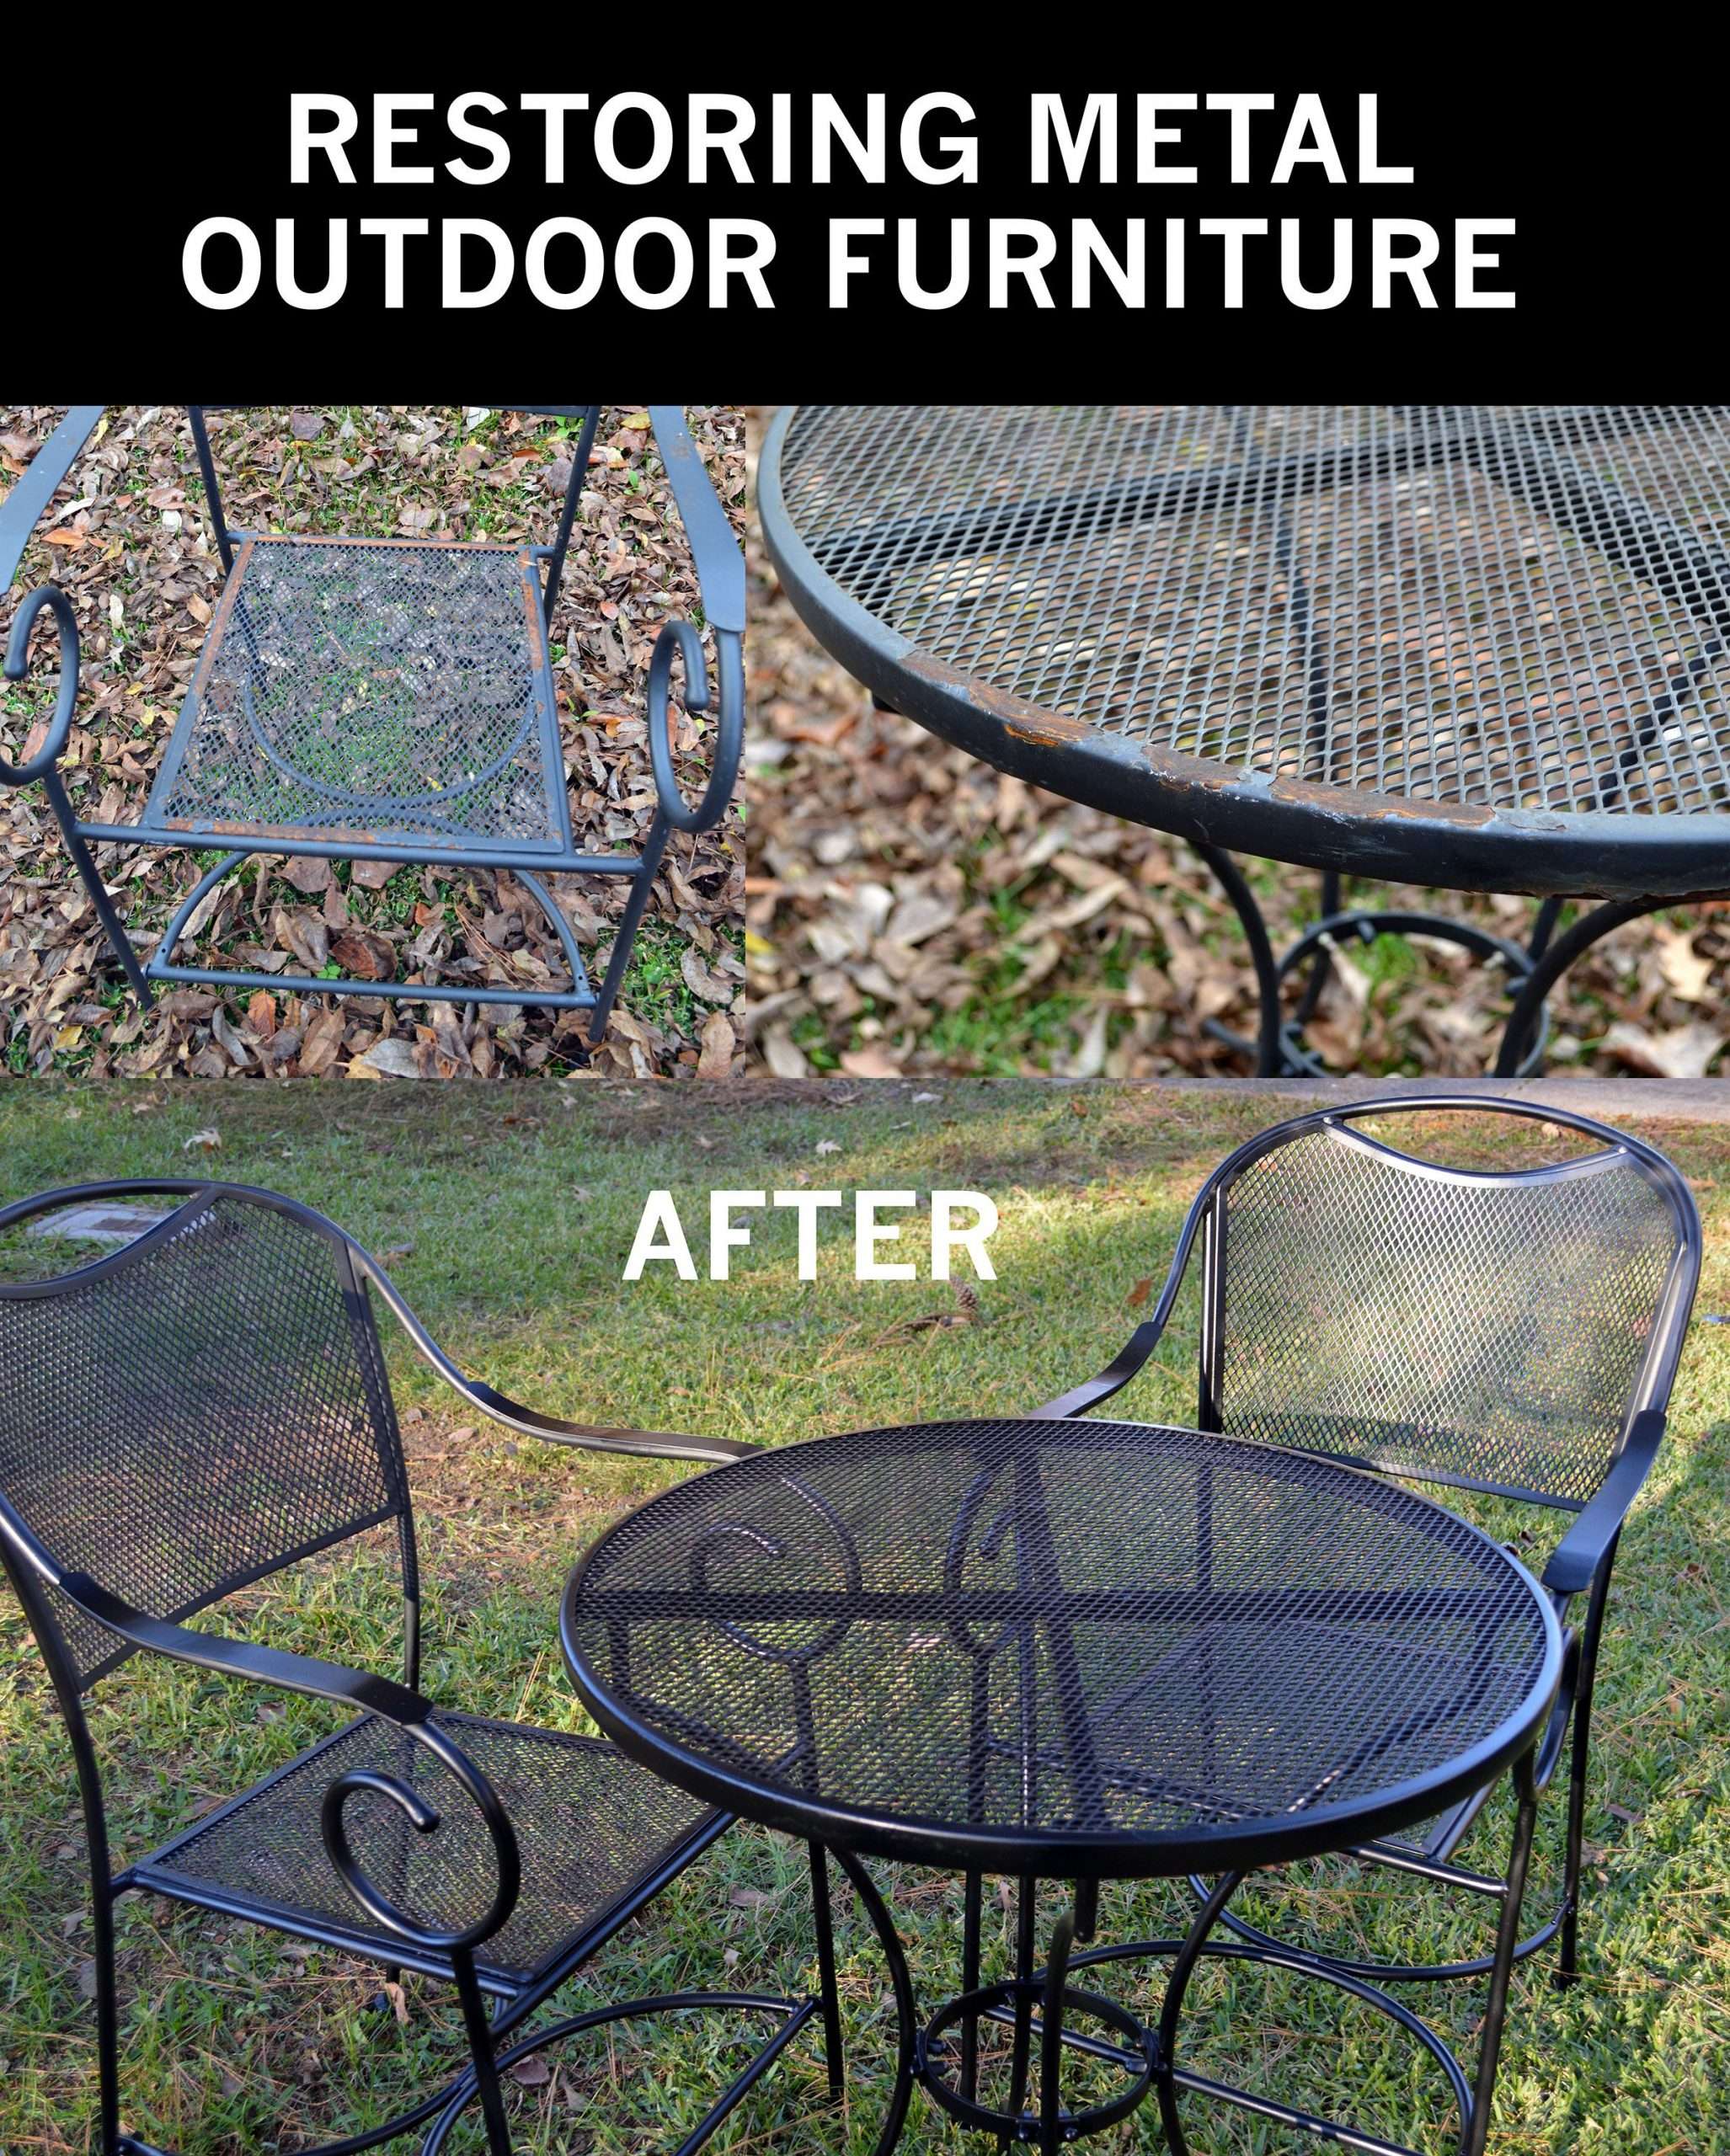 A few years ago, I bought a really cute patio furniture ...